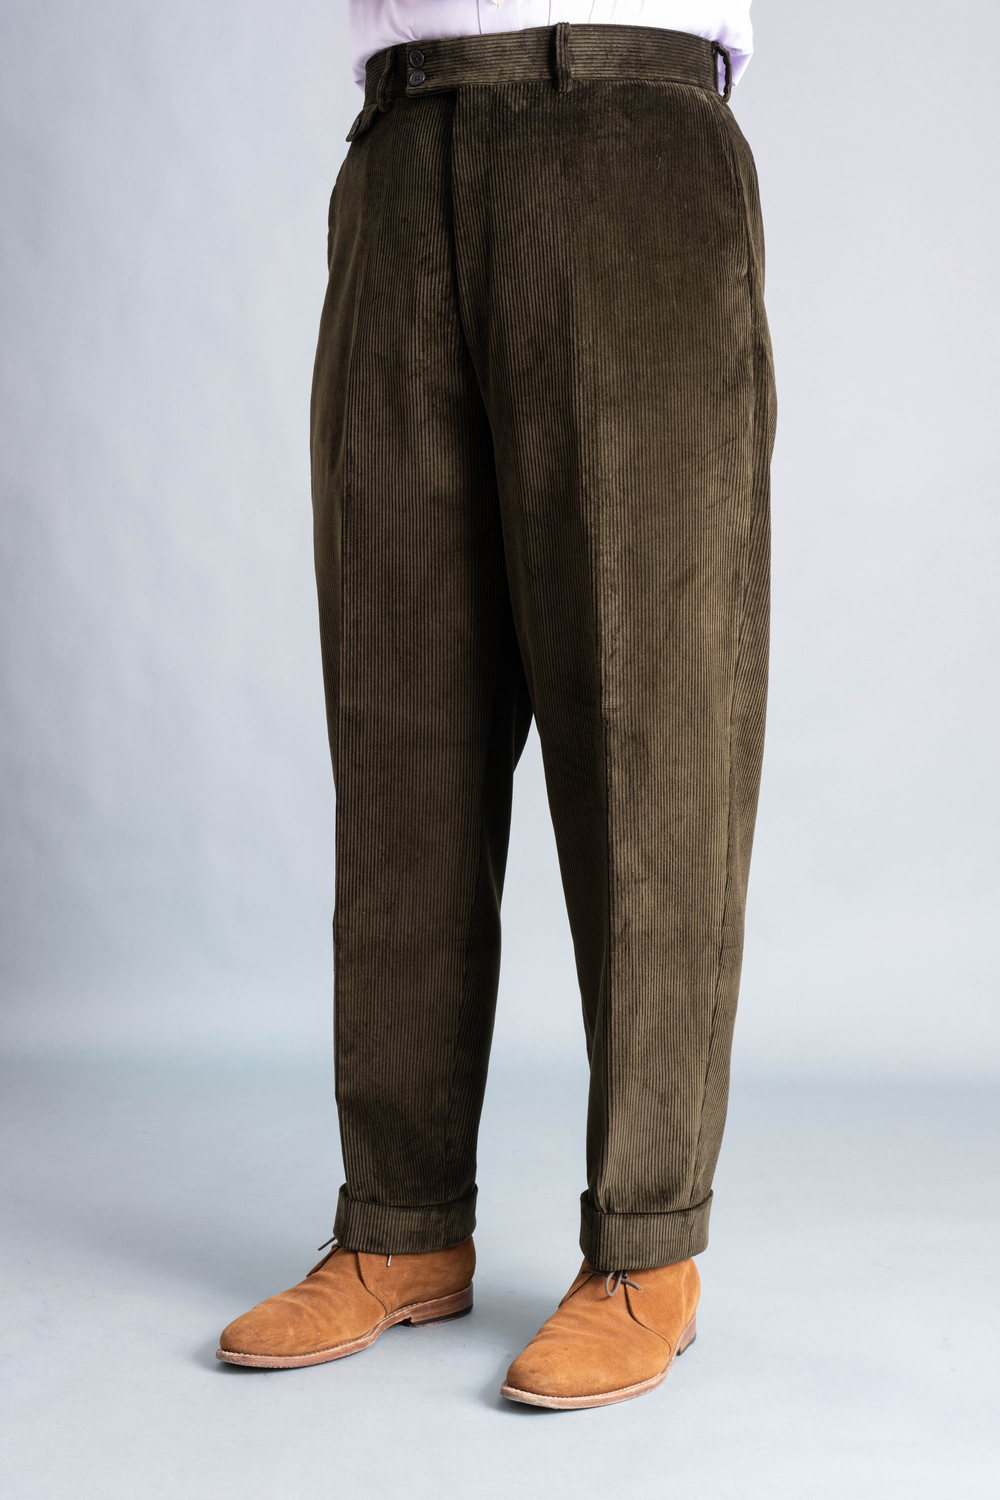 Stancliffe Flat Front 8-Wale Corduroy Trousers by Fort Belvedere